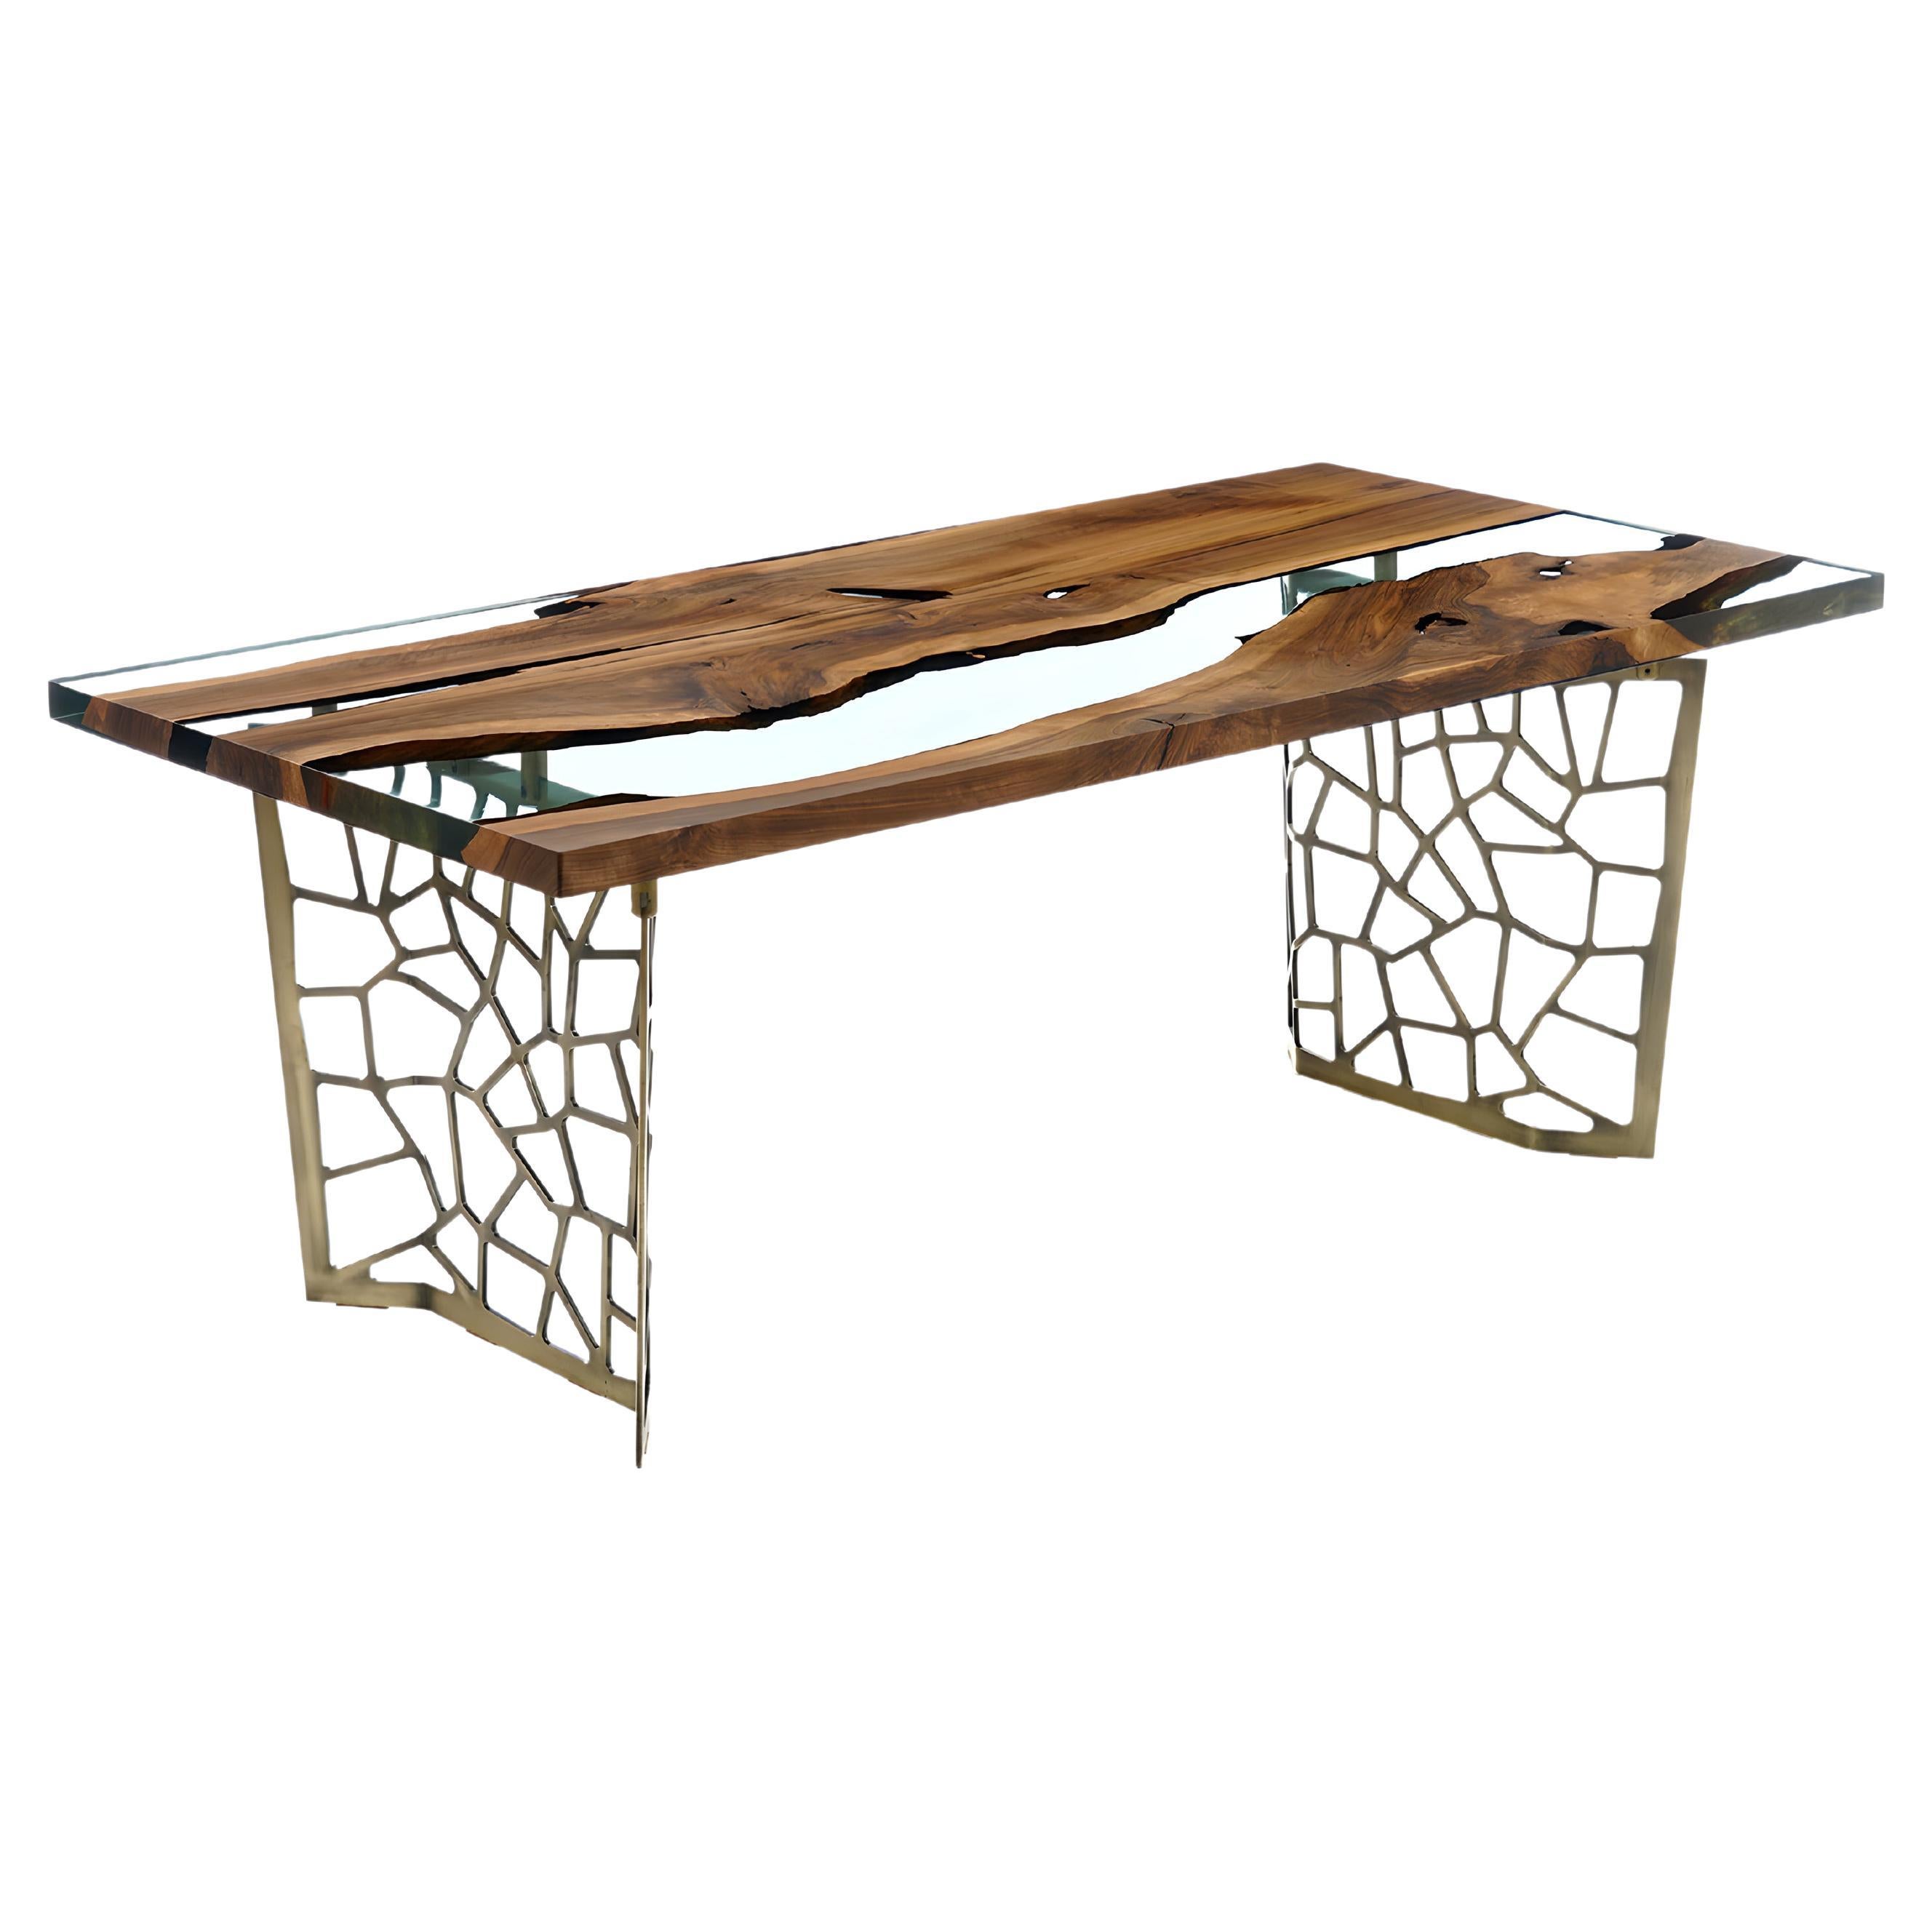 Efil Dining Table: Embedded Walnut Resin Table